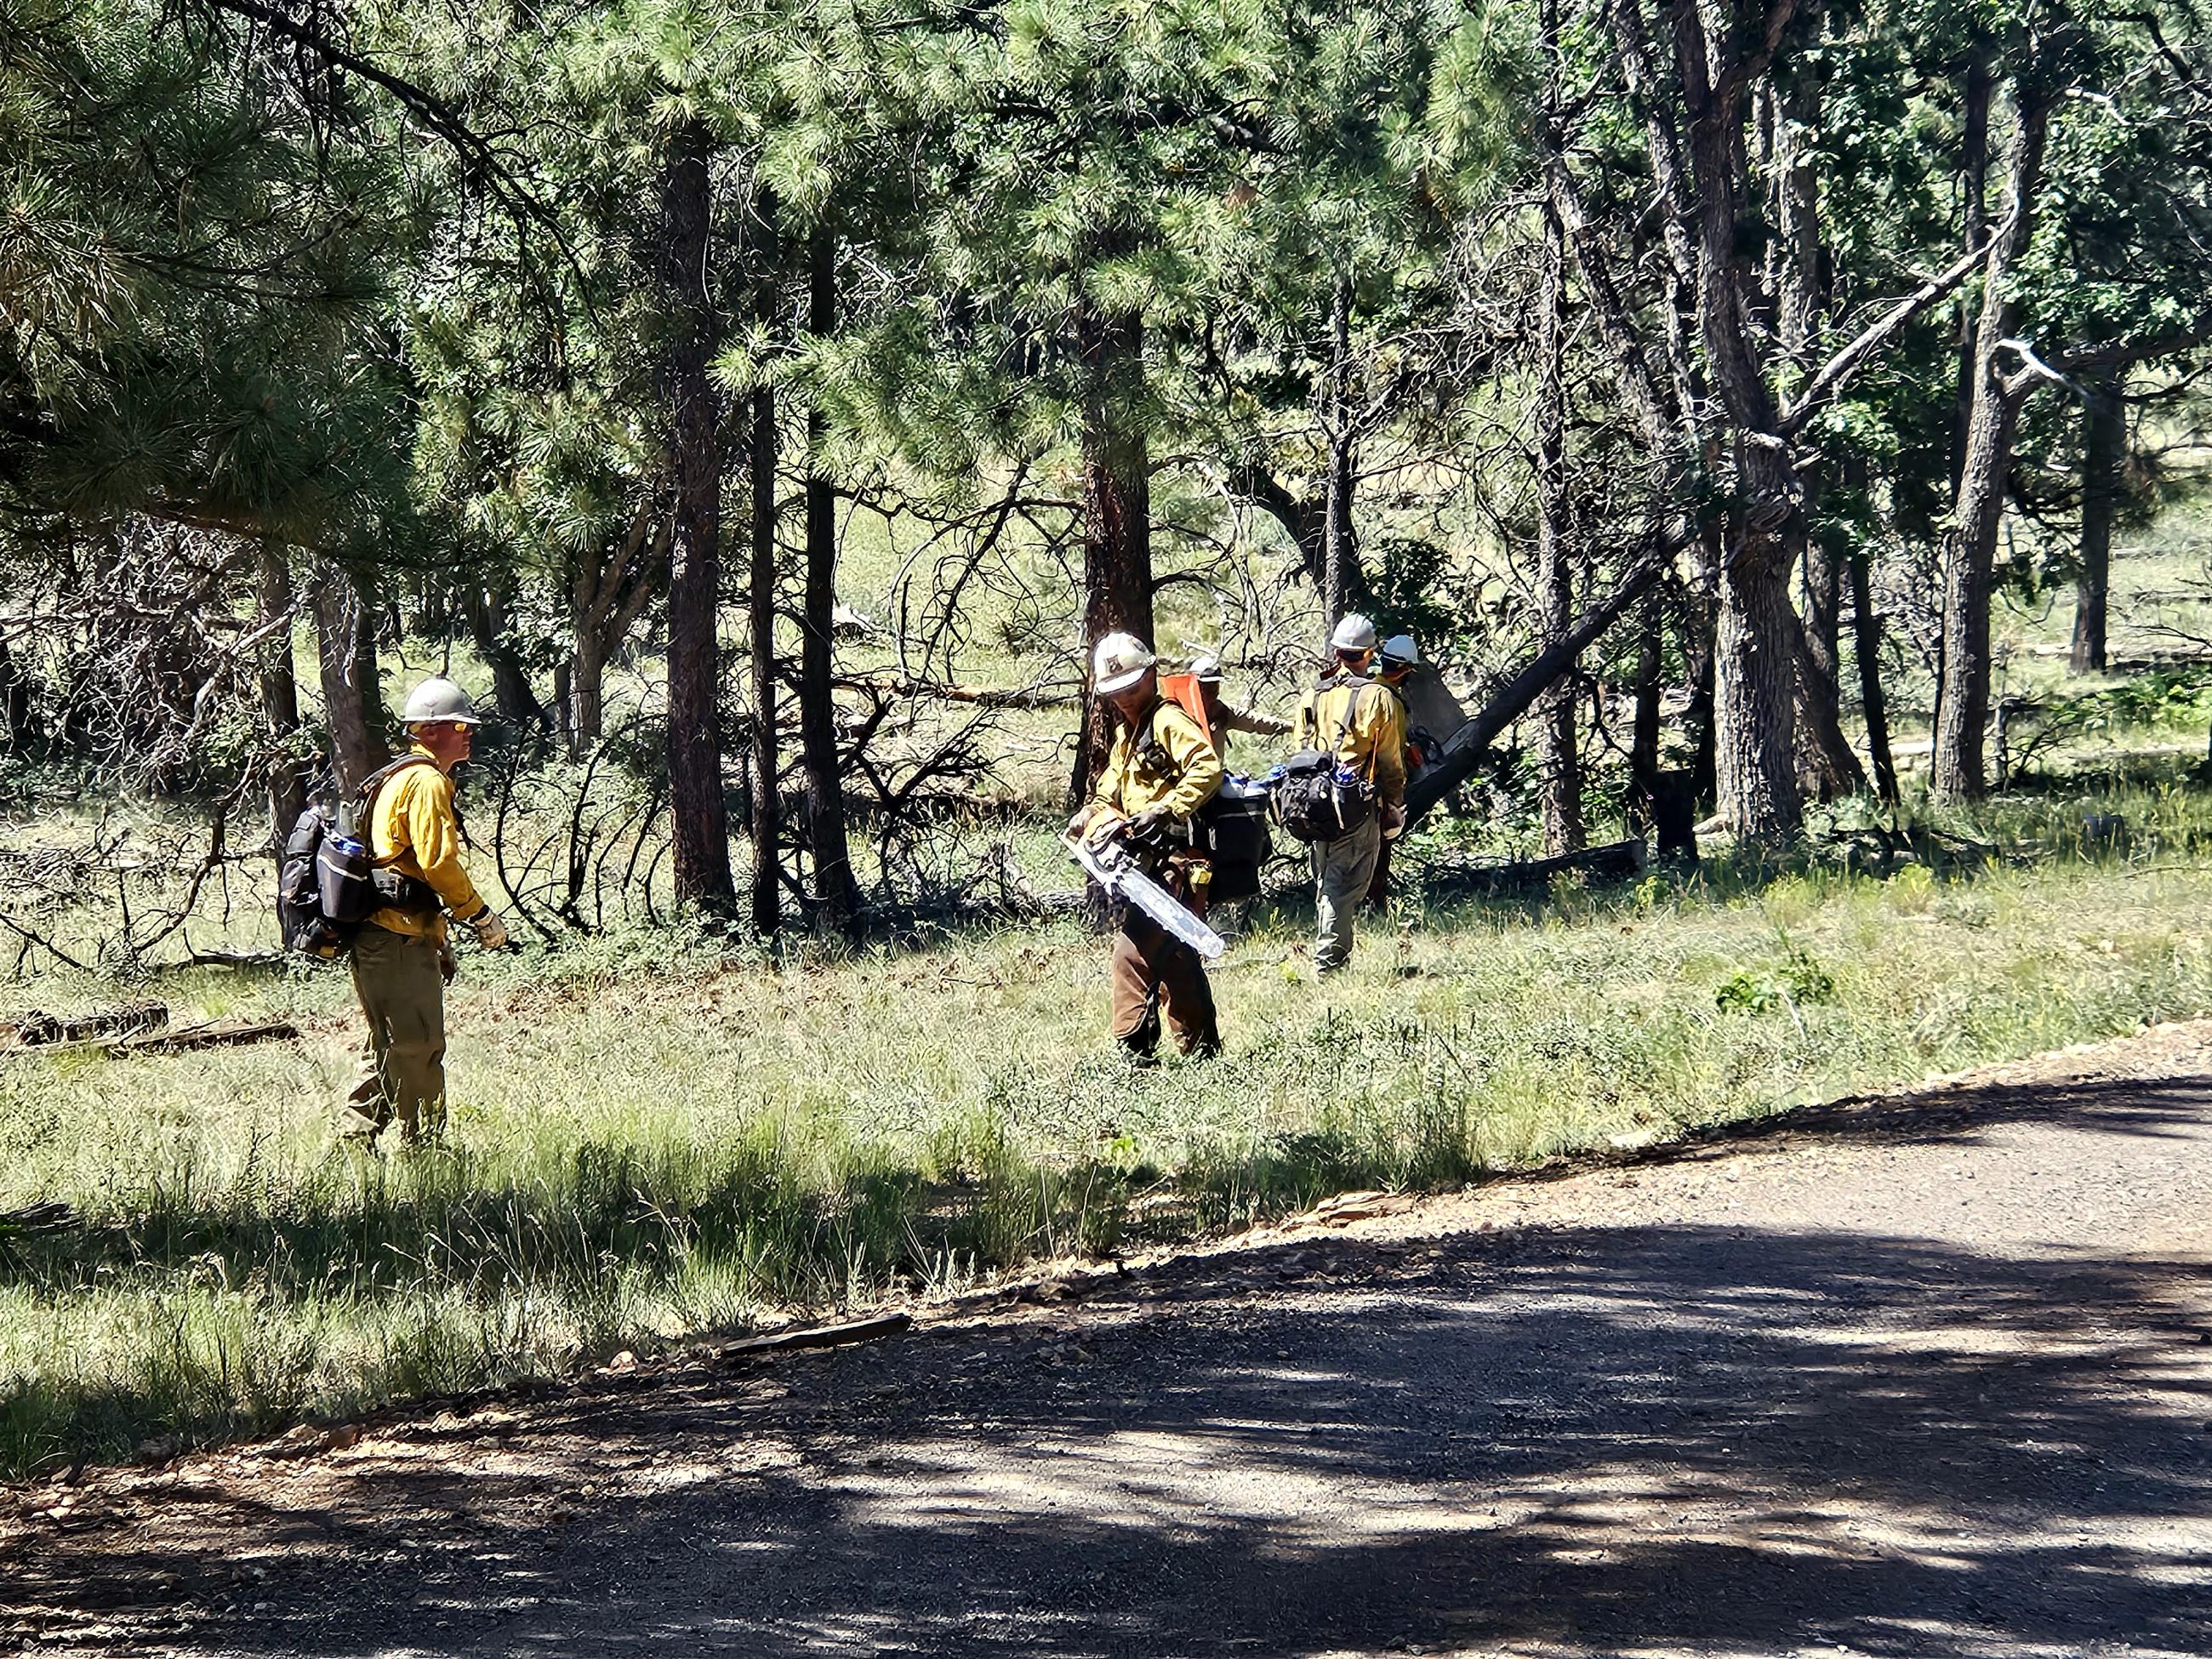 Fire crew members are using chainsaws to remove vegetation near a forest road while other fire crew members pull the cut vegetation away from the road.